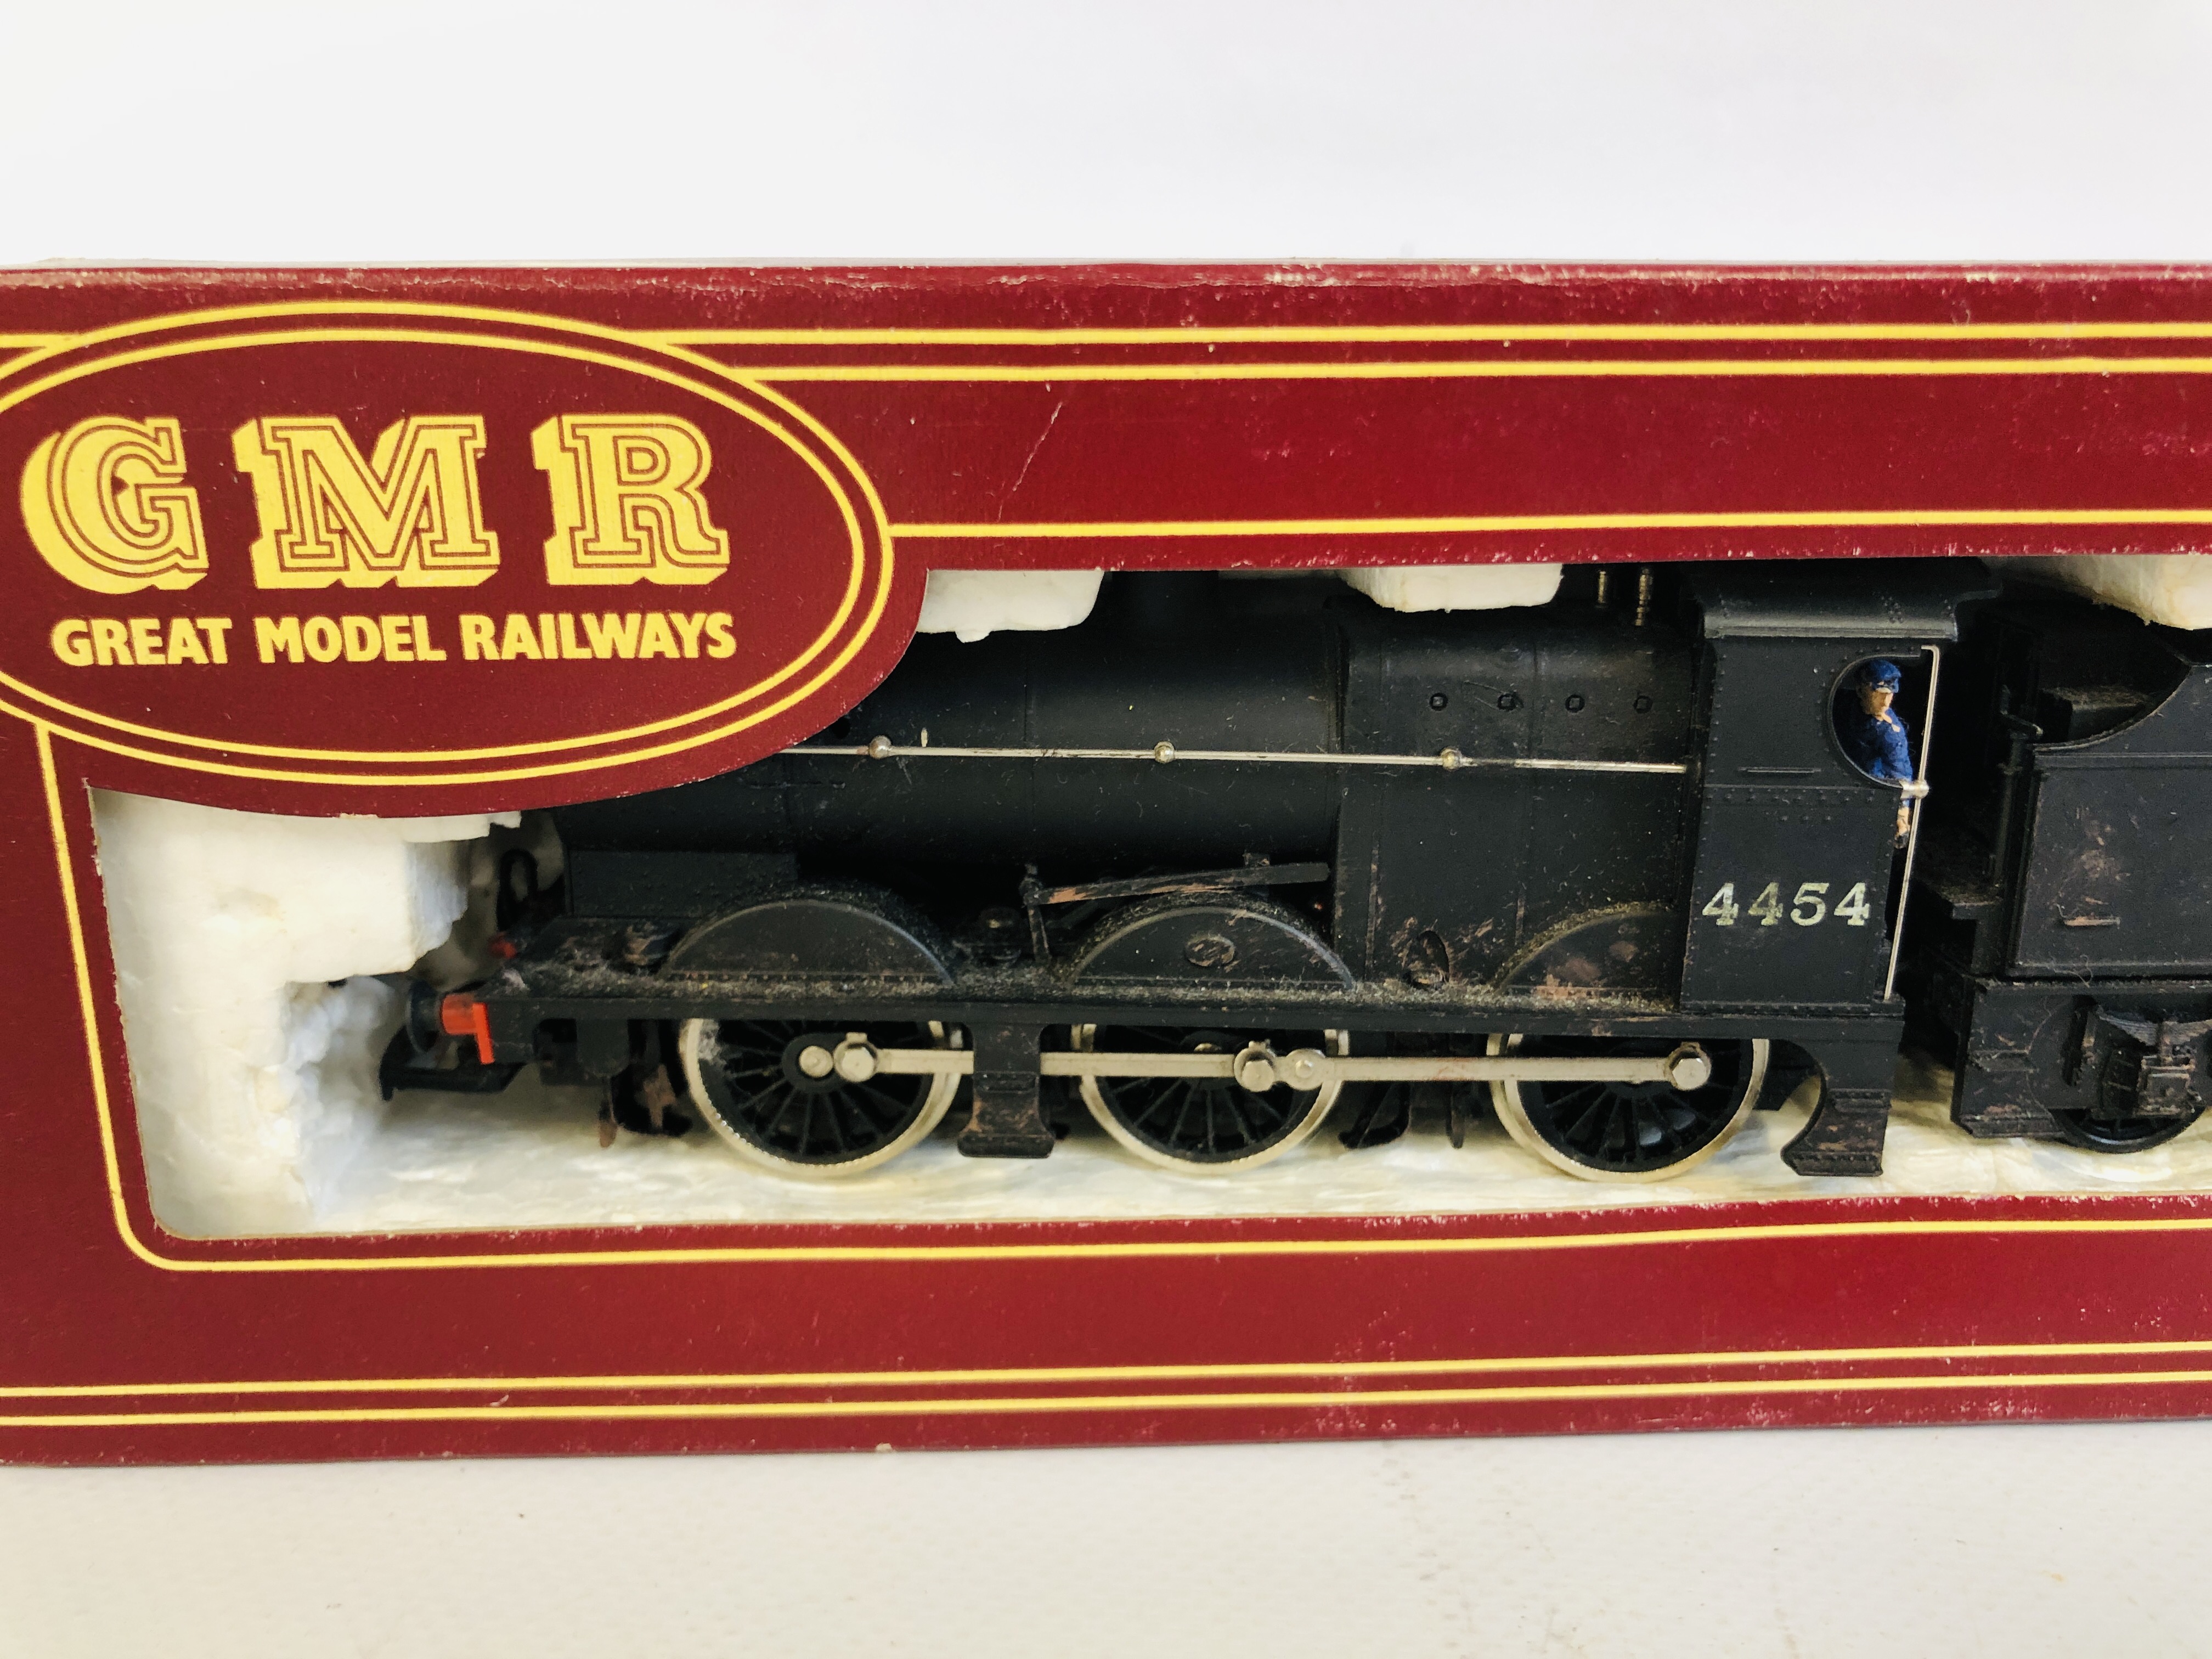 HORNBY 00 GAUGE 06003 LOCOMOTIVE BOXED AND AIRFIX GMR 4454 LOCOMOTIVE AND TENDER BOXED - Image 2 of 4